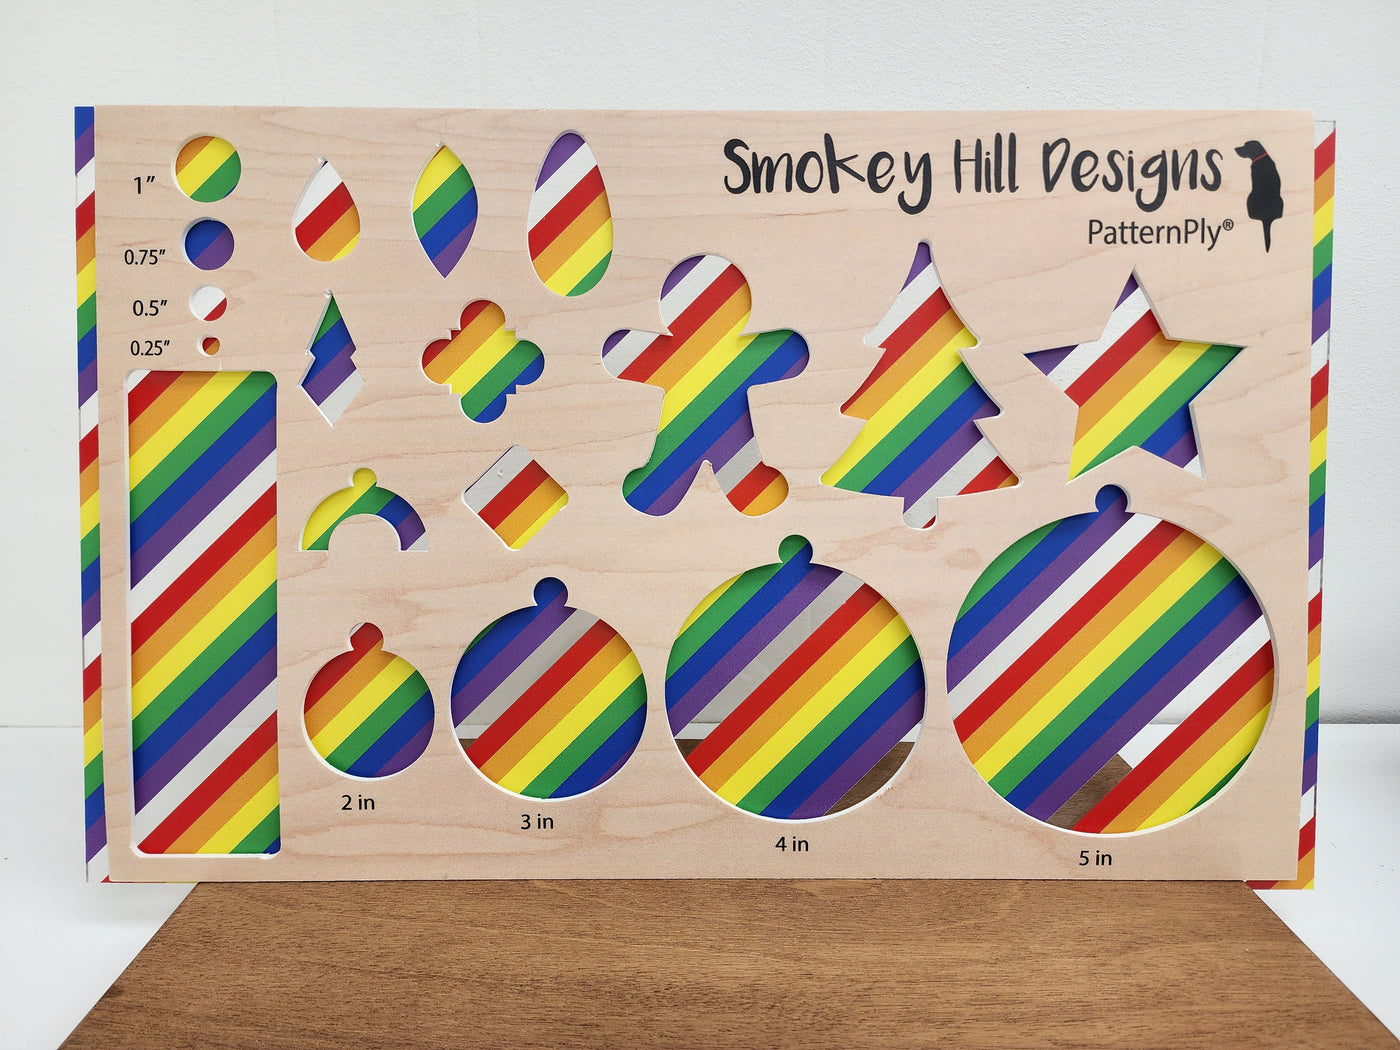 PatternPly® Scattered Diagonal Rainbow Stripes LARGE